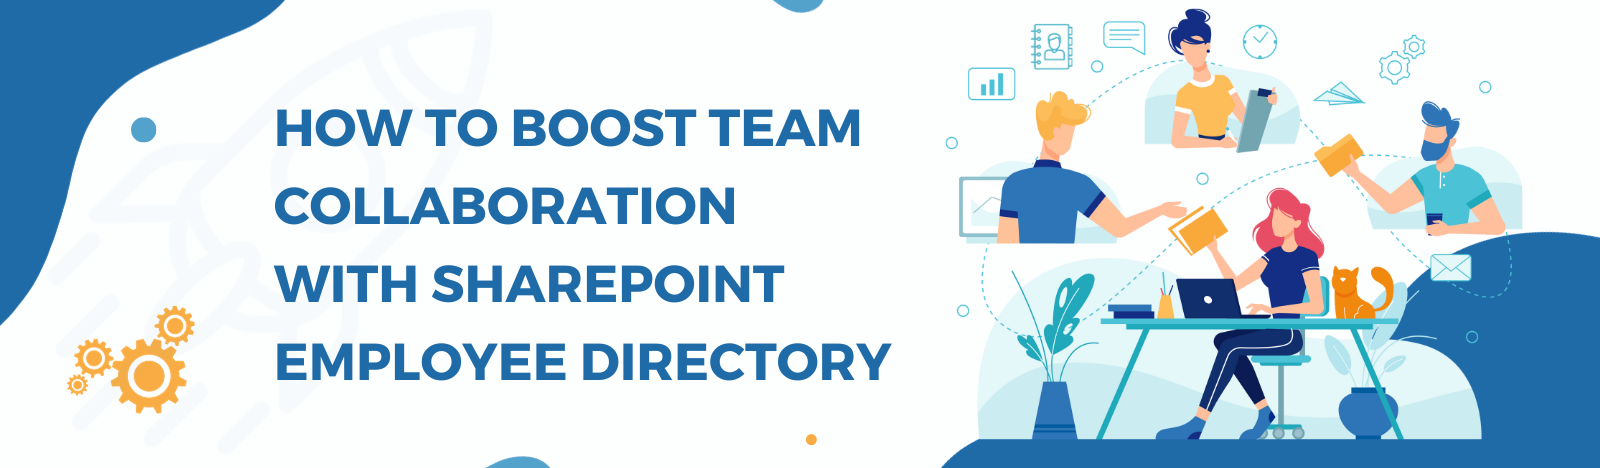 SharePoint Employee Directory Banner Image